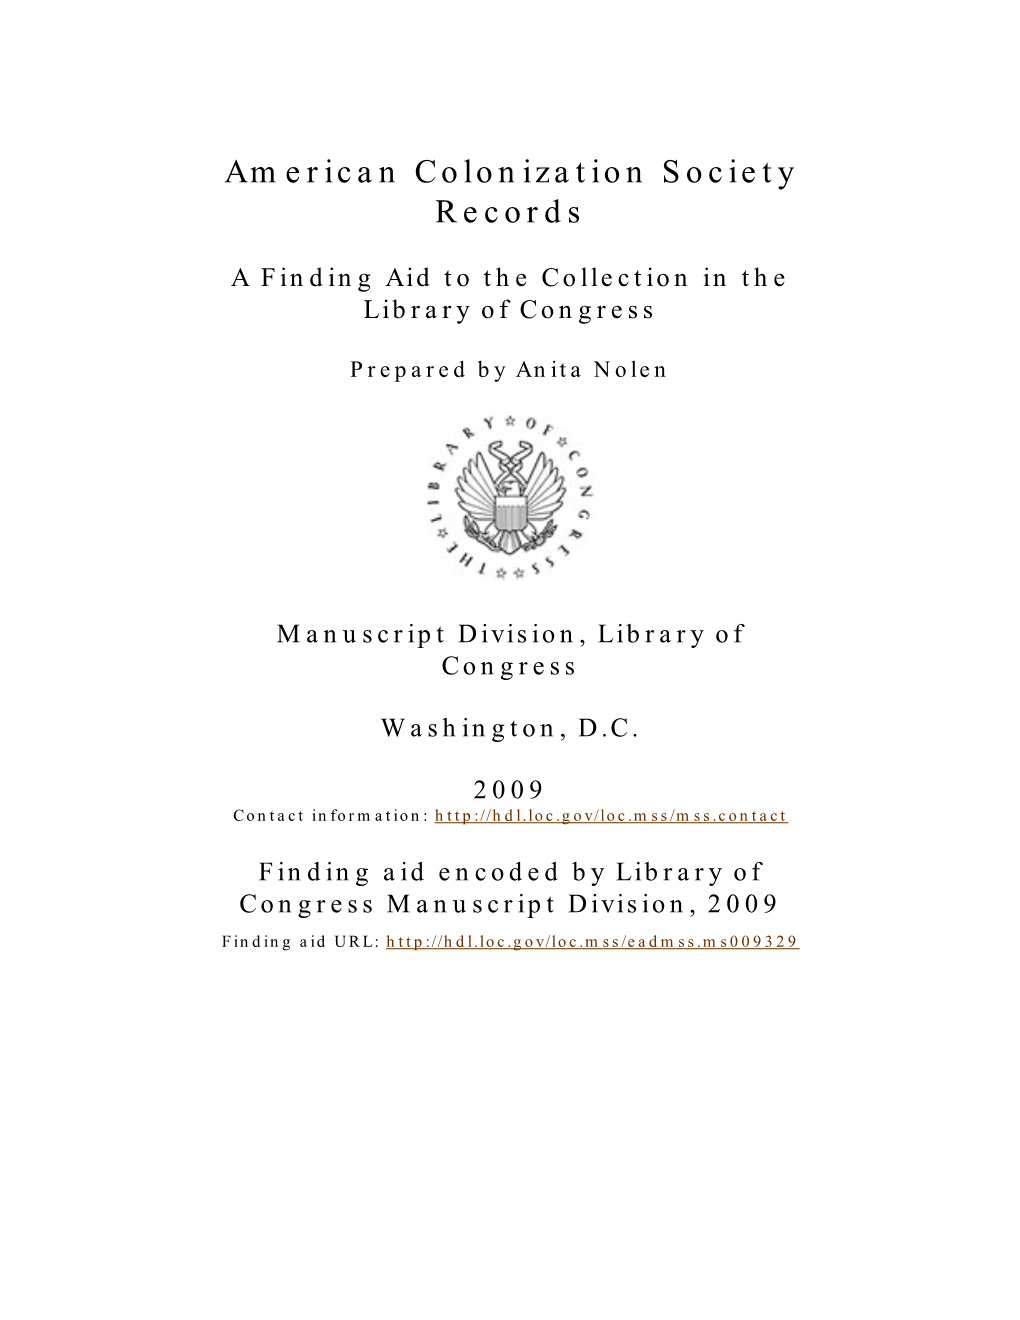 American Colonization Society Records [Finding Aid]